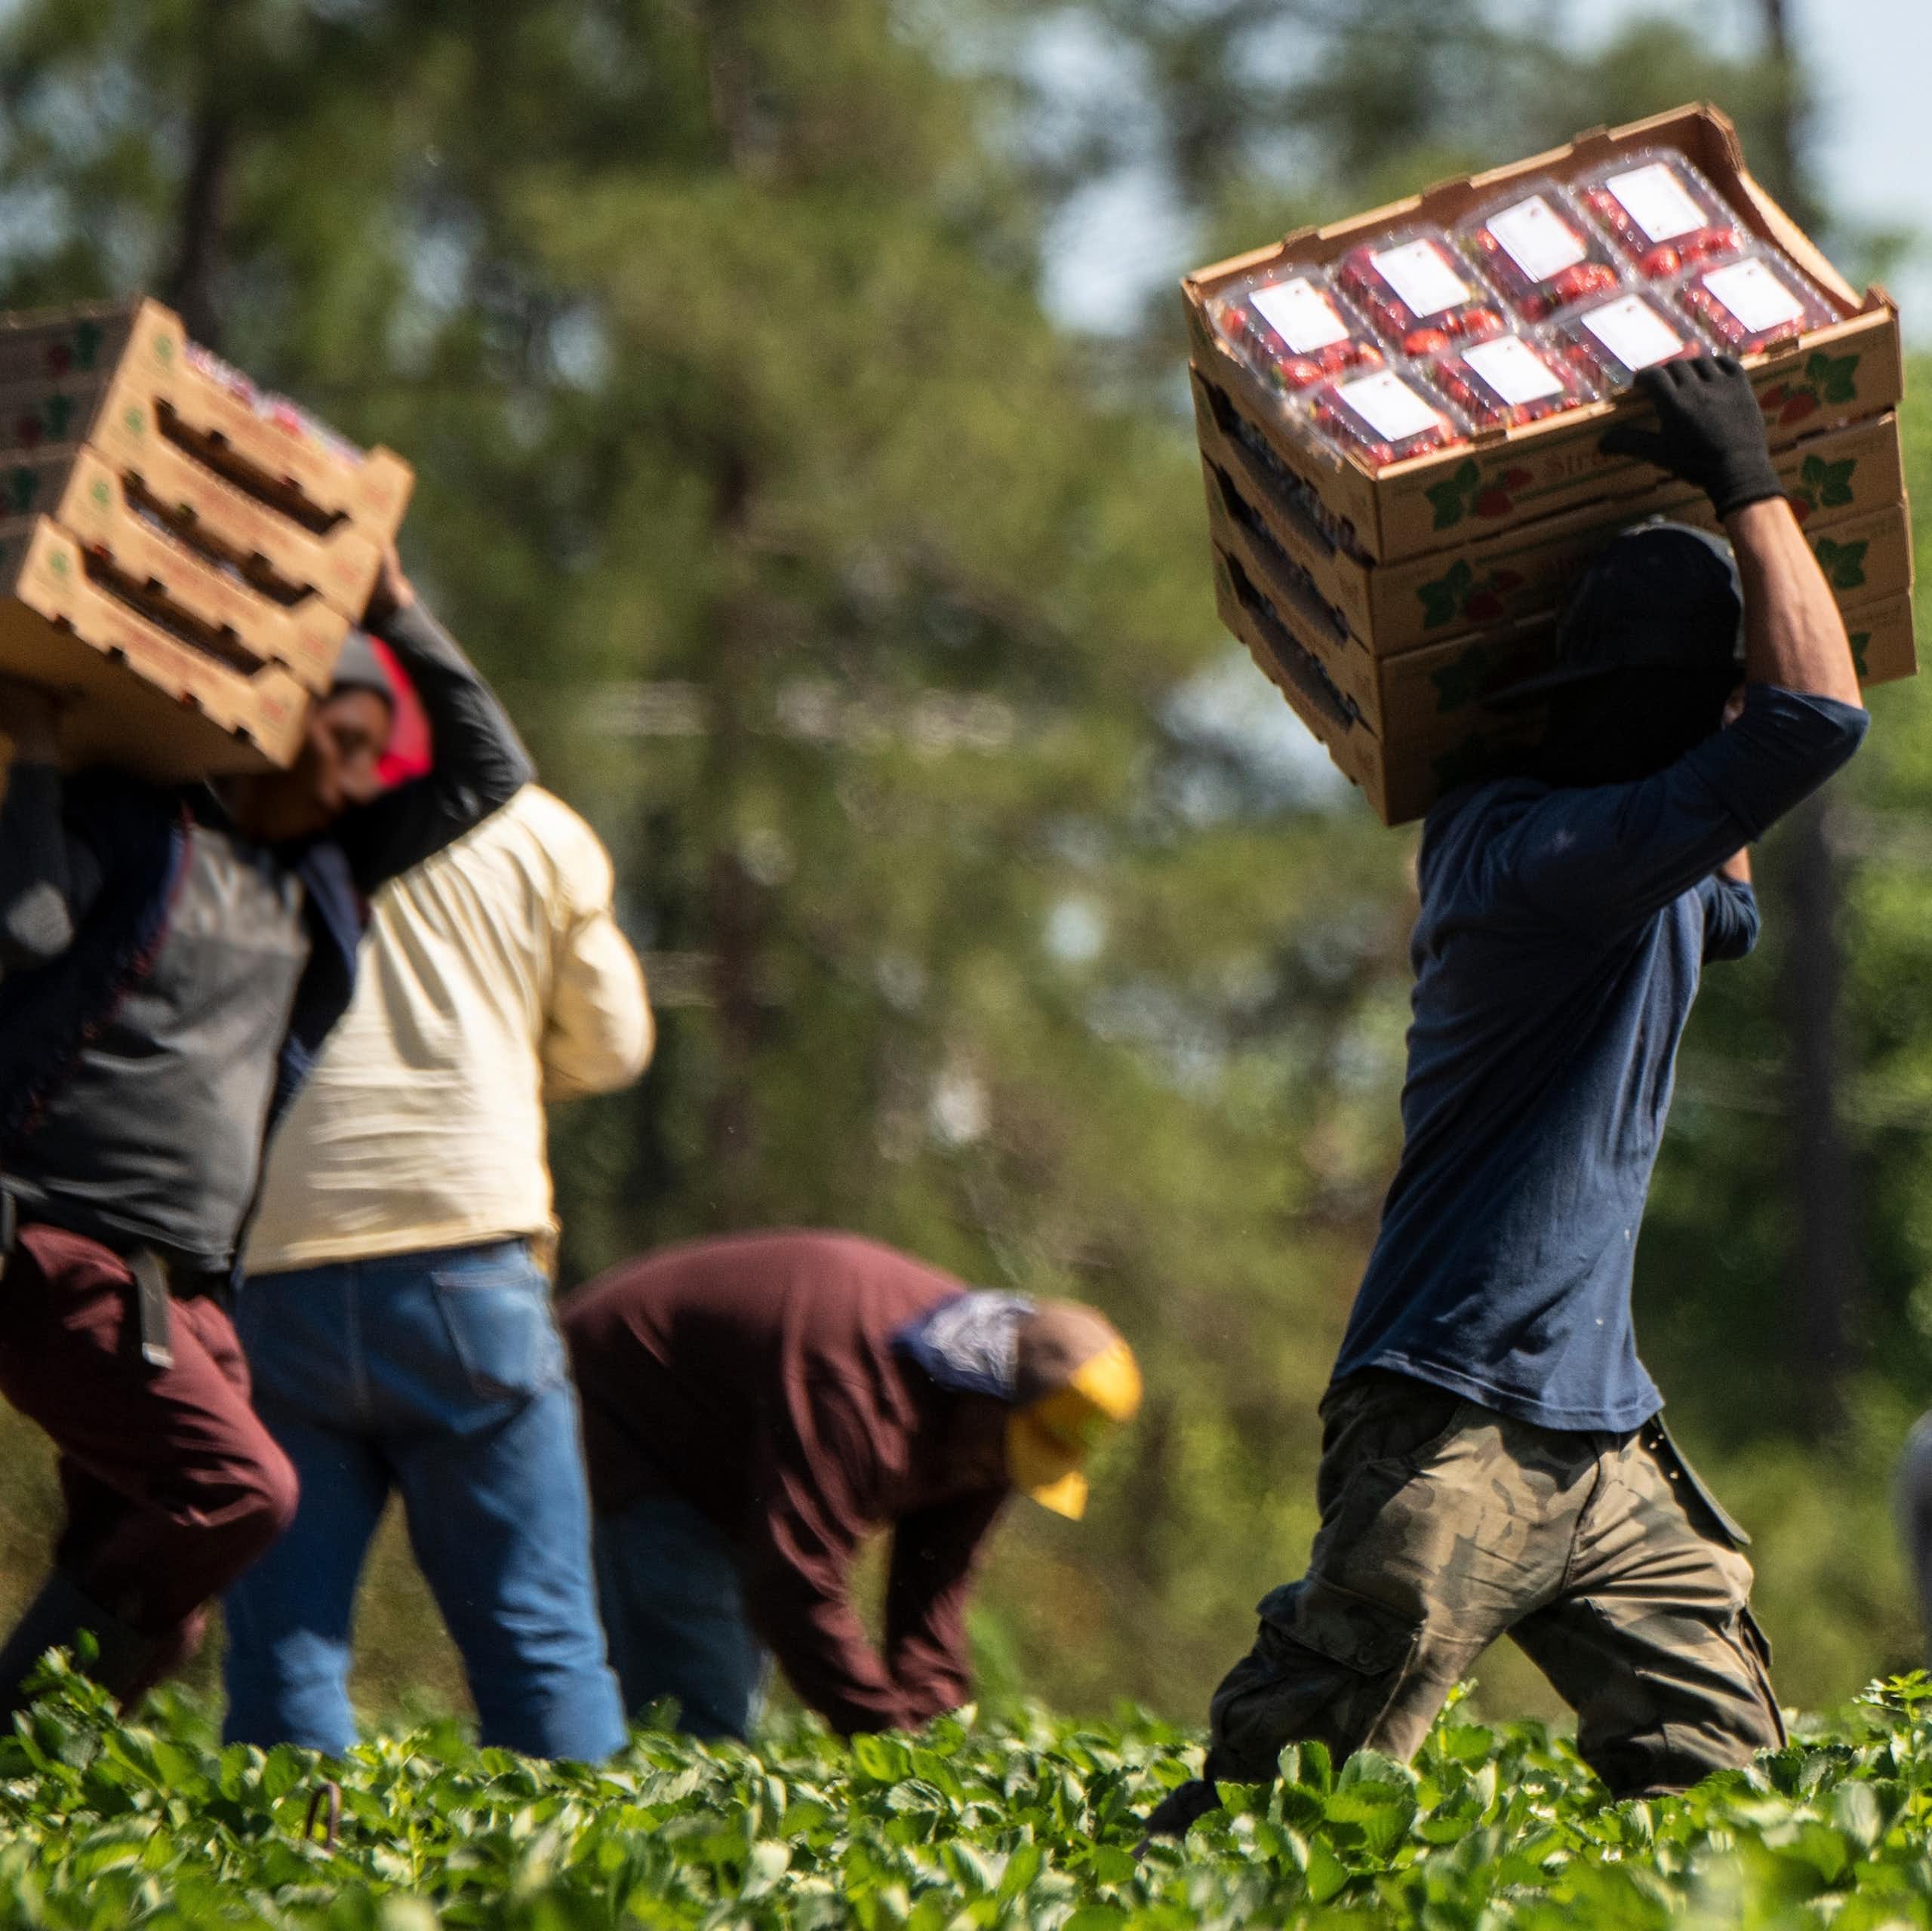 Farm workers carrying boxes of produce in a field.